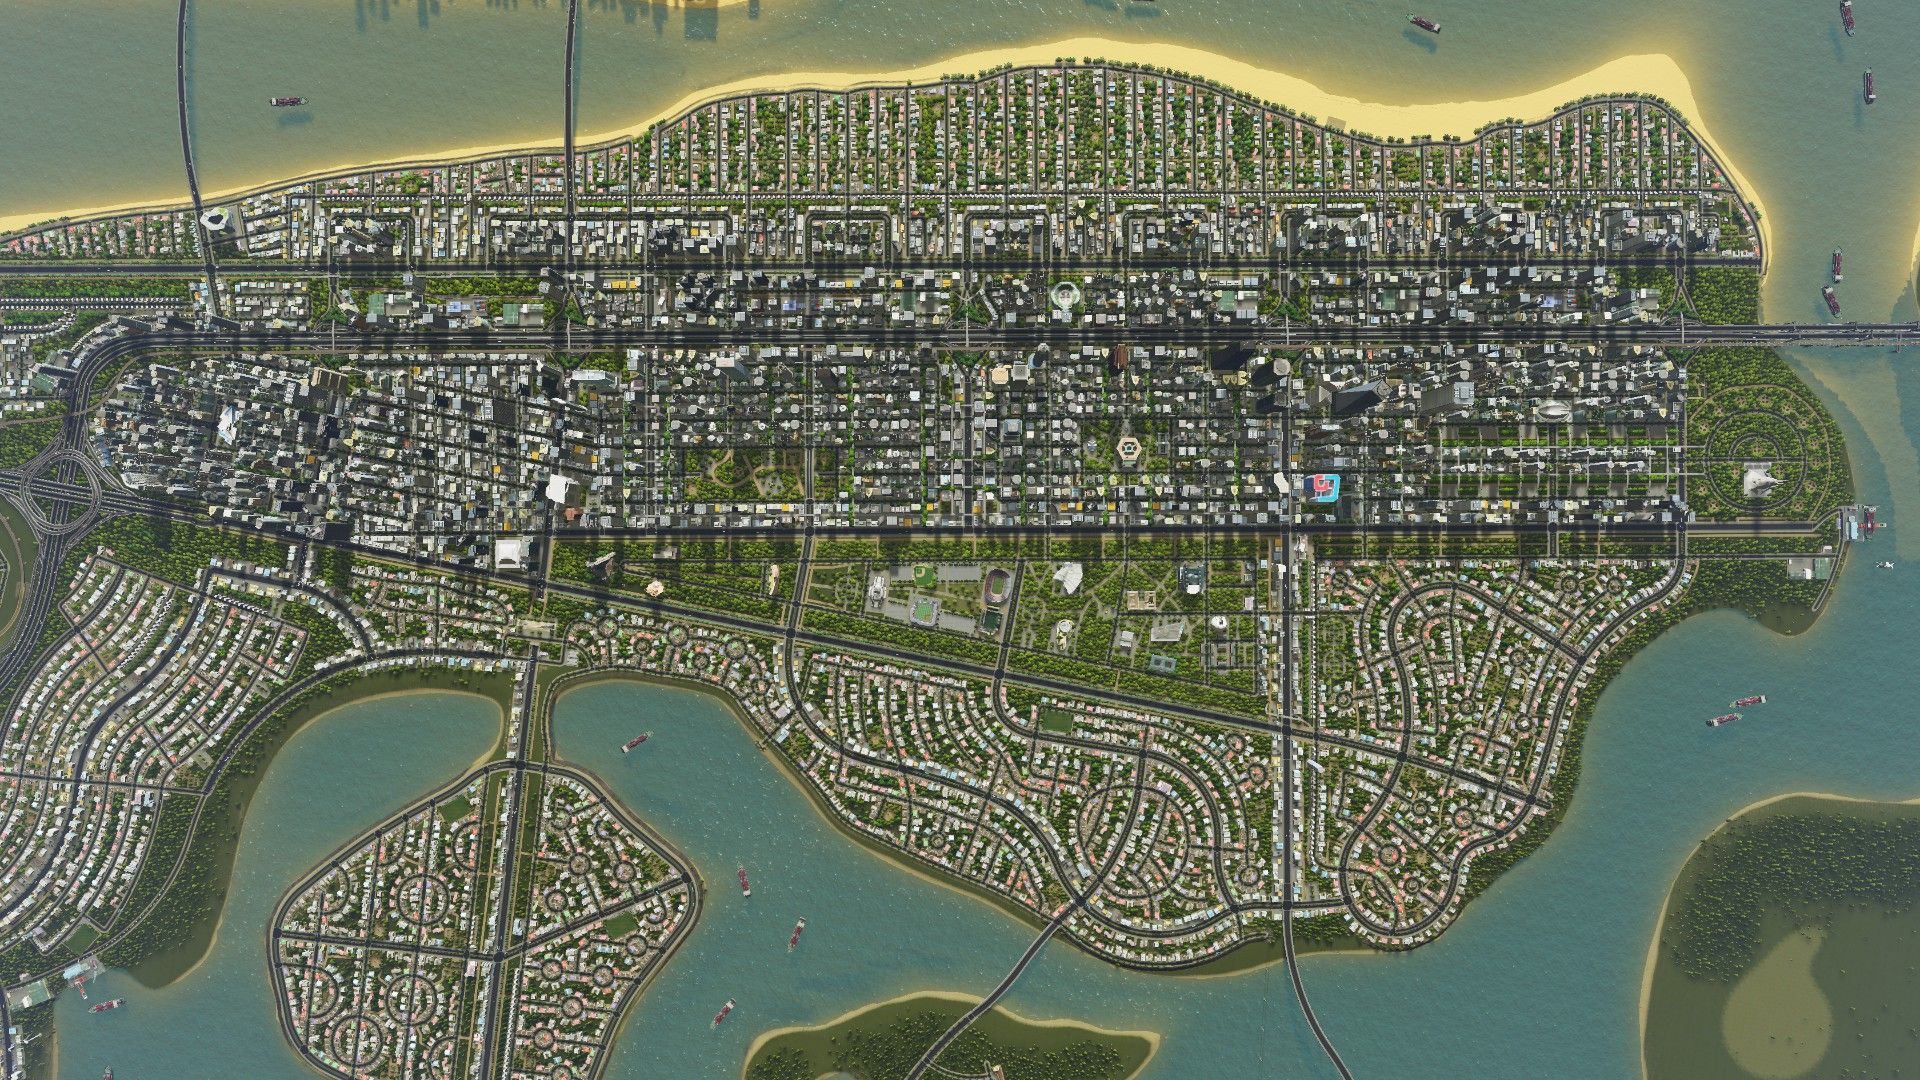 Cities Skylines Competition in 2020: Why is there none?